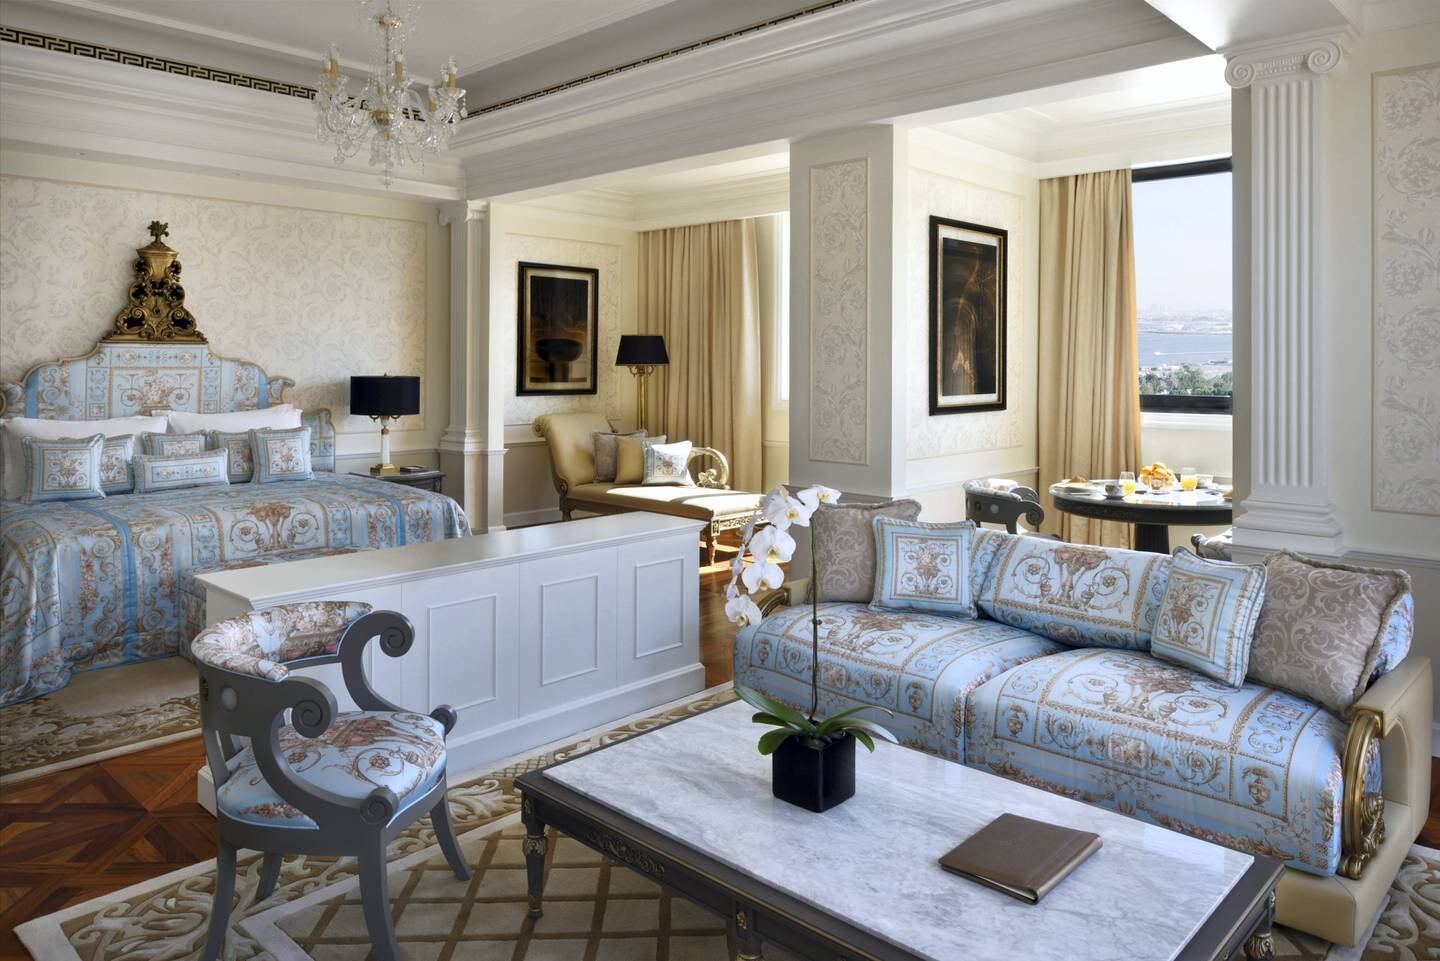 Imperial Suite's bedroom at Palazzo Versace dubai. Courtesy Palazzo Versace Dubai